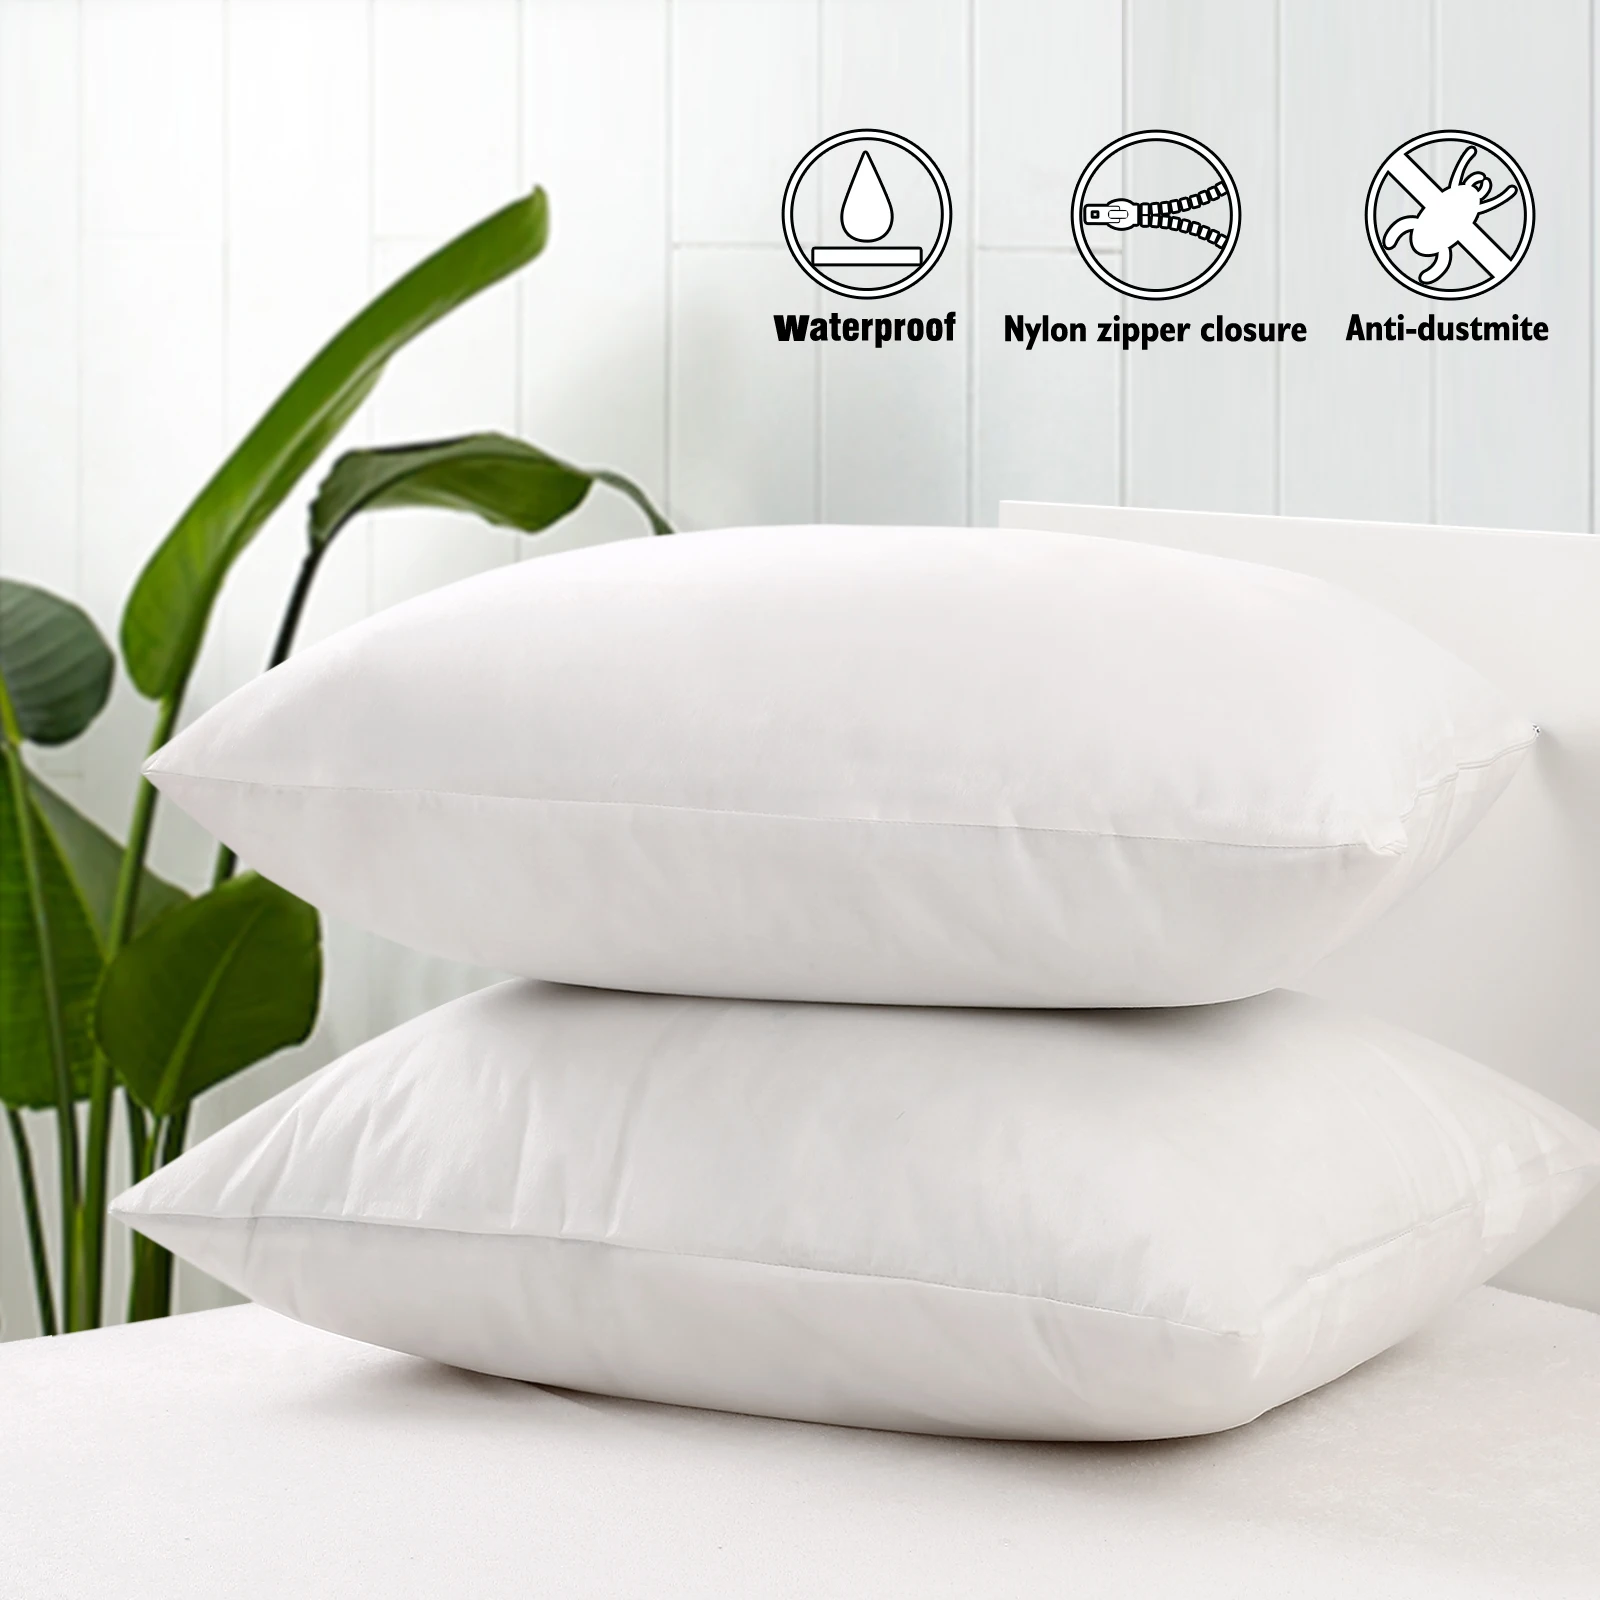 MZXcuin Premium Pillow Protectors Waterproof,  Dust Mite Bed Bug Proof Pillowcase, Hypoallergenic Zippered Pillow Covers